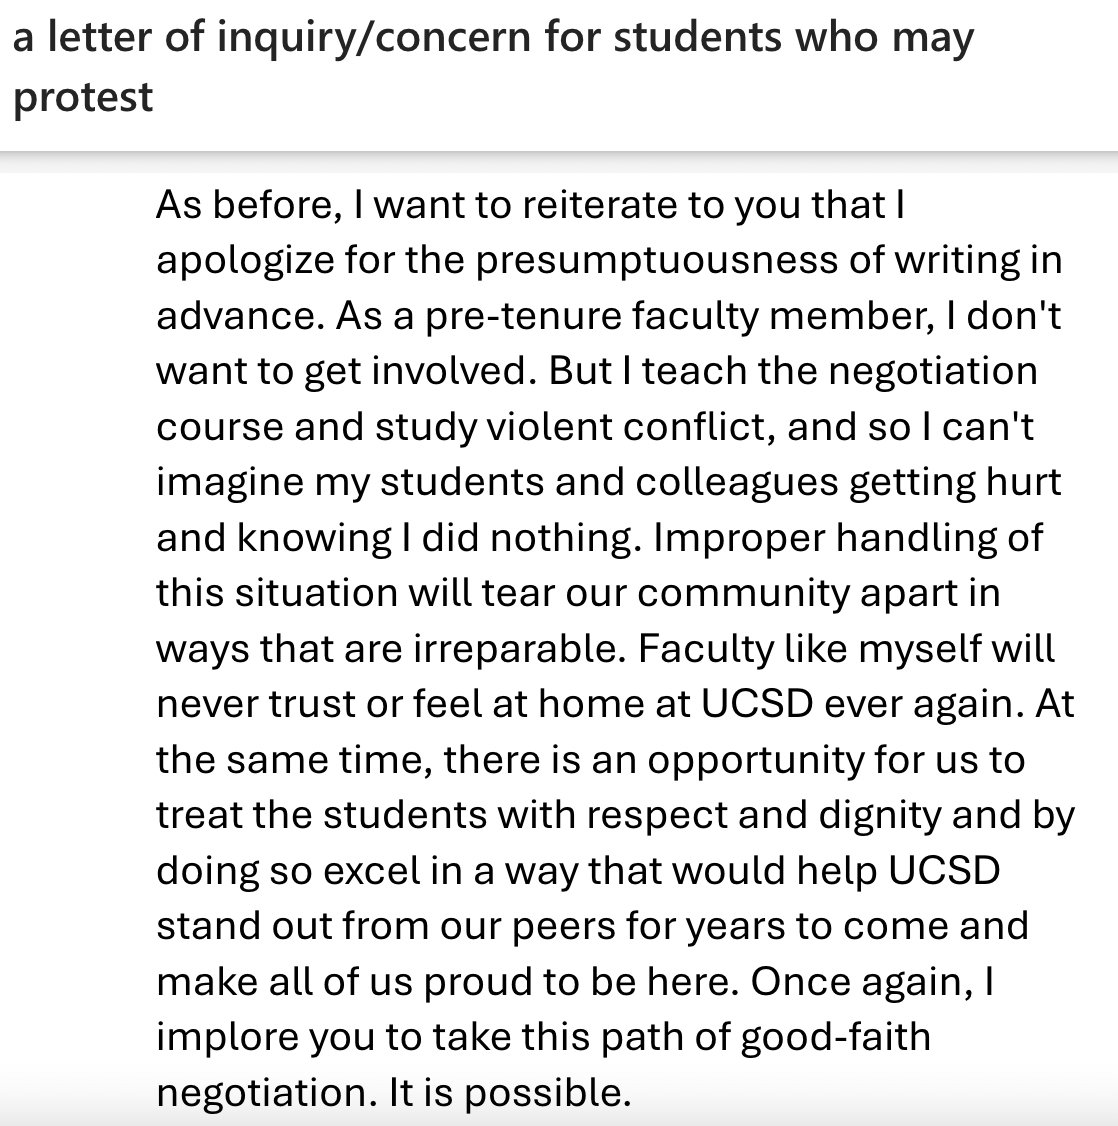 This morning, UCSD sent in riot police to violently remove students. Below is the letter I sent Chancellor Khosla yesterday urging against this action. The protests are 100% peaceful. Leadership is endangering student safety as a show of force to appease donors. 1/